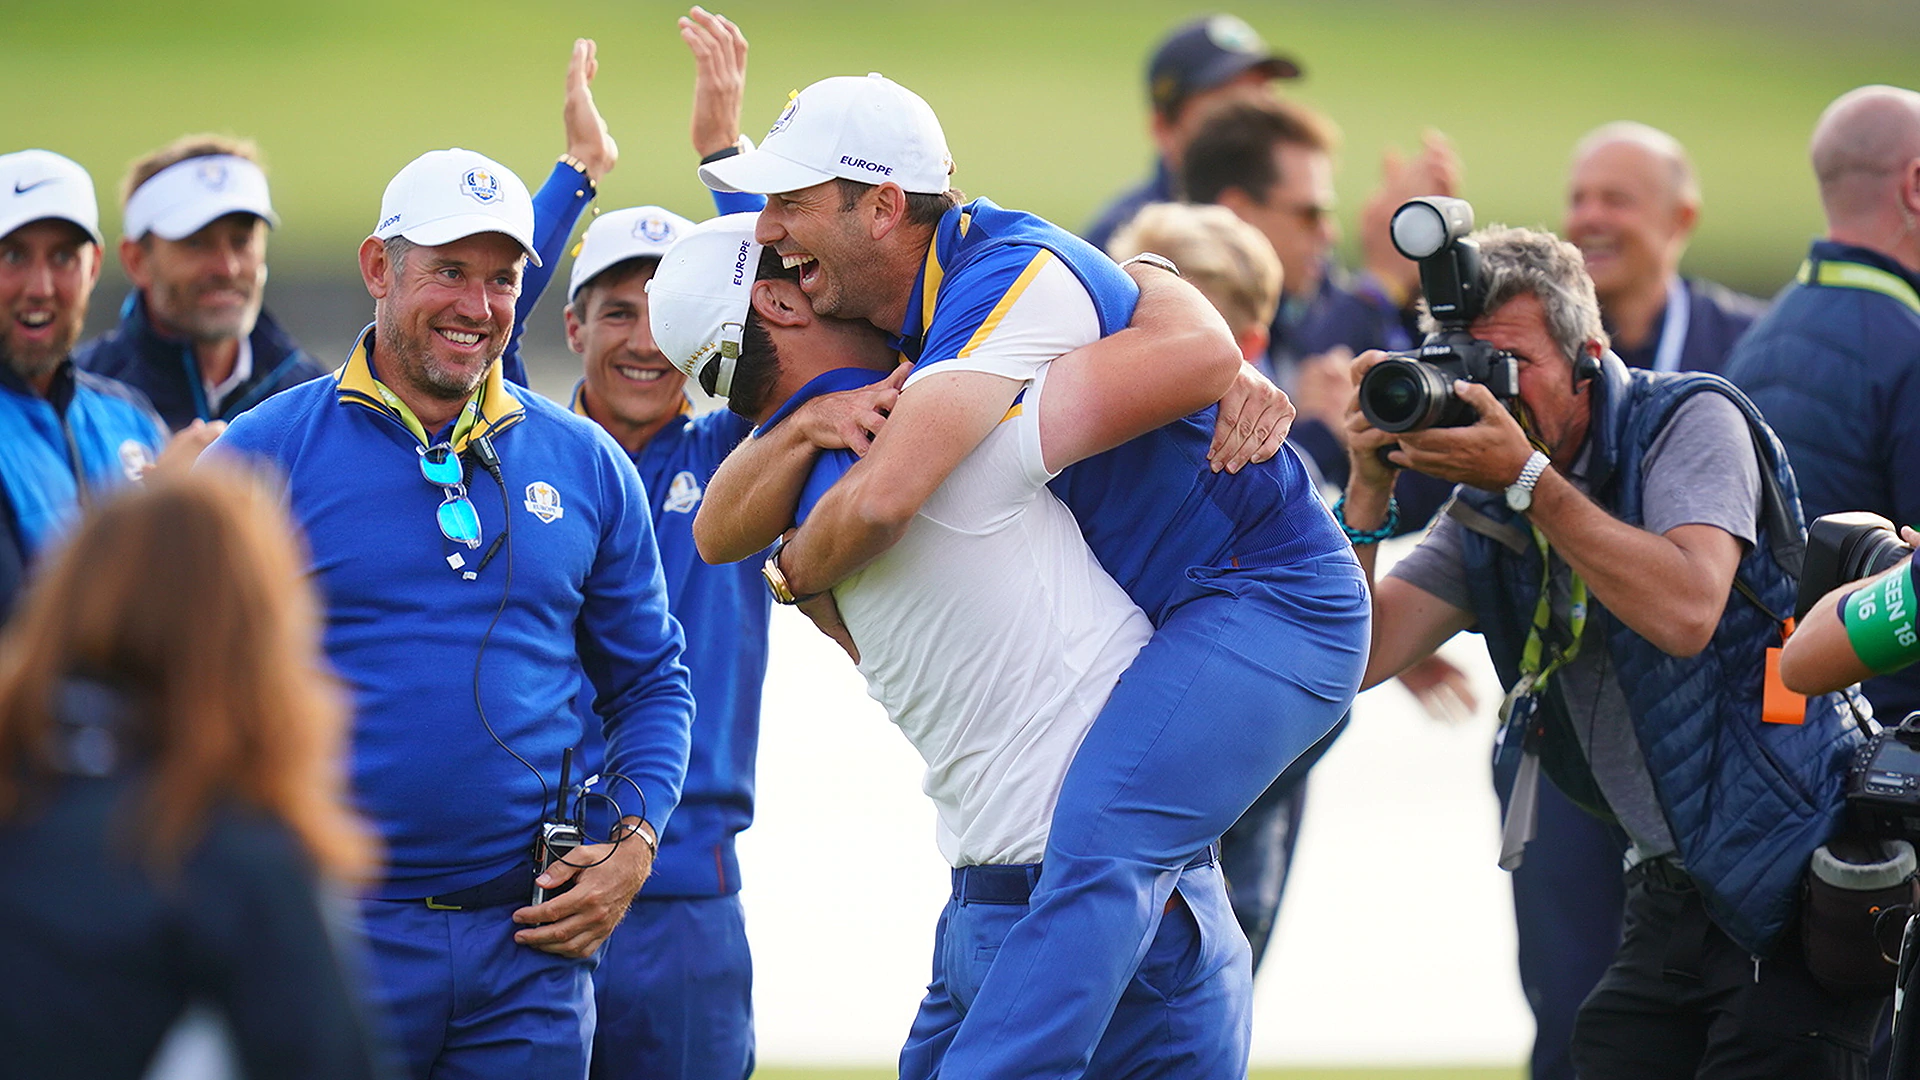 Watch: The video that inspired Team Europe